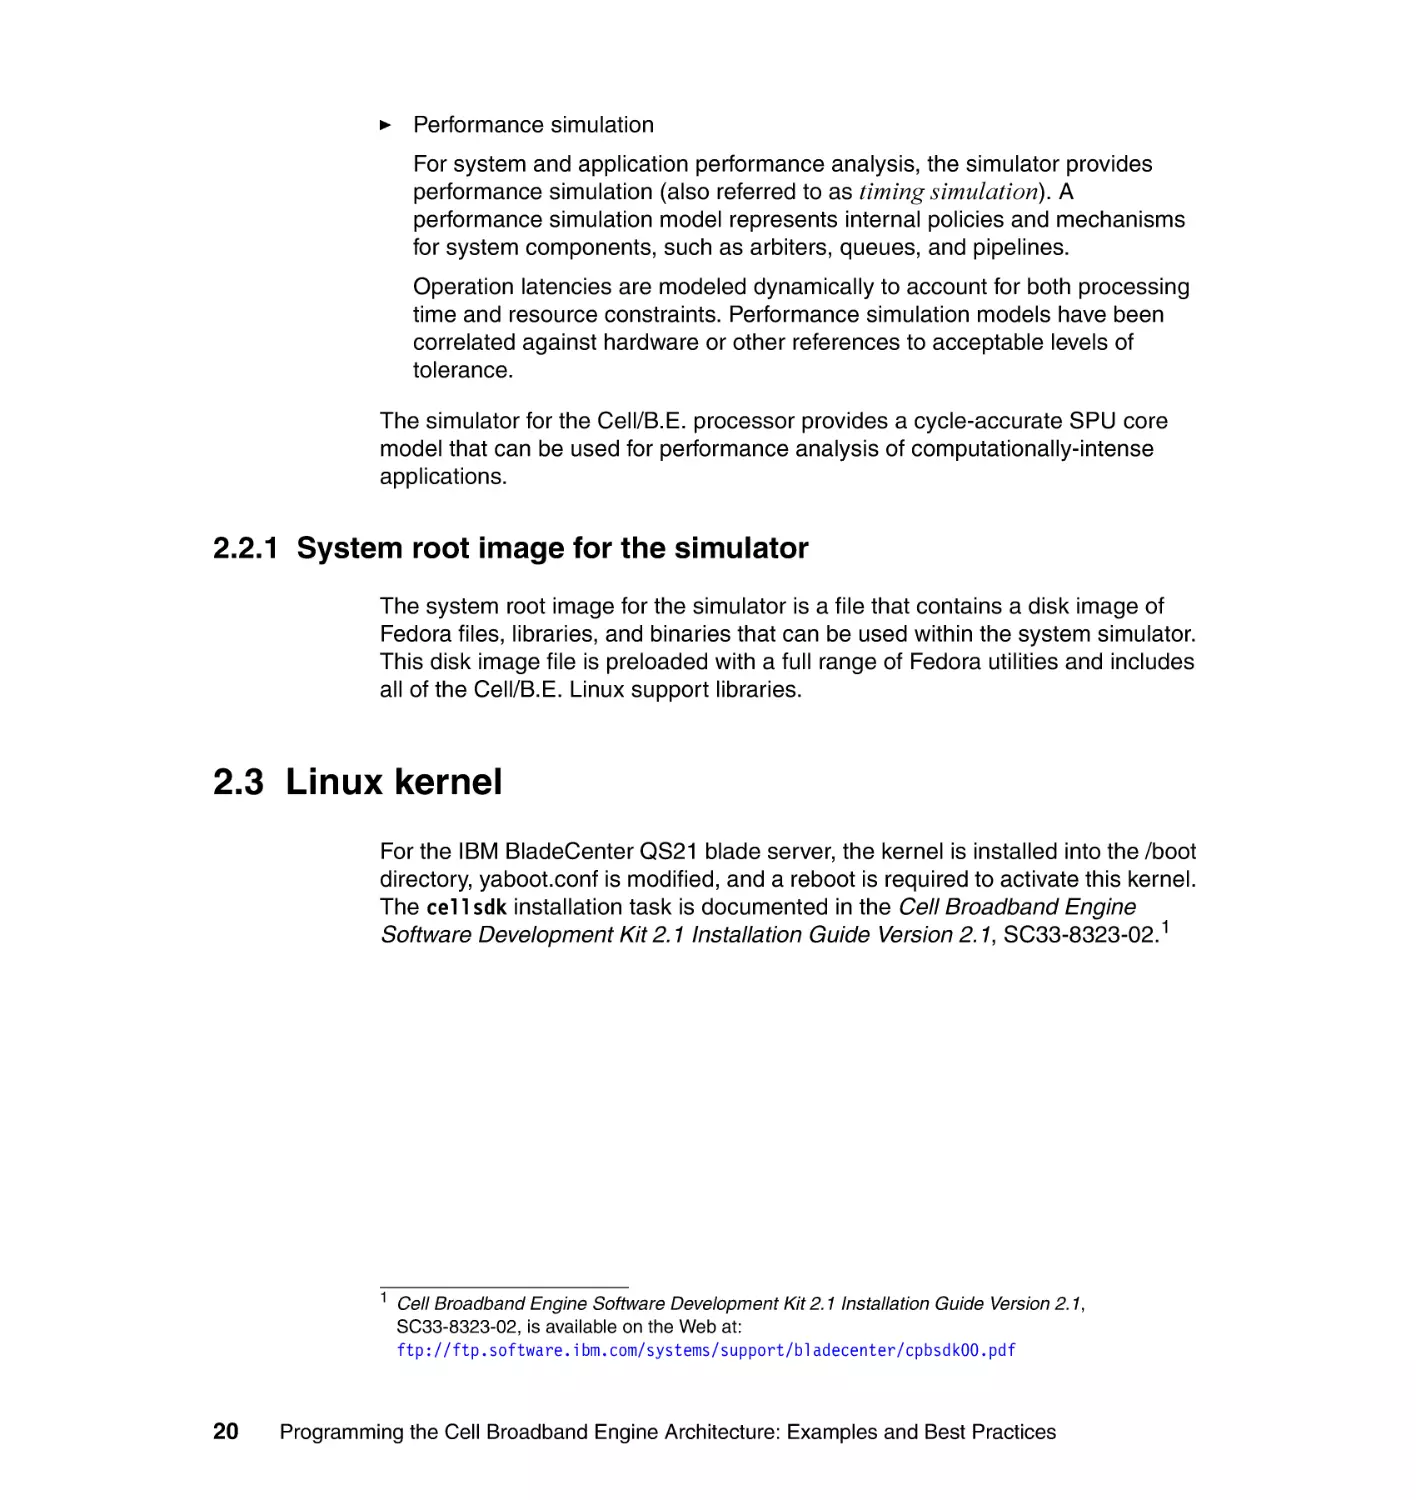 2.2.1 System root image for the simulator
2.3 Linux kernel